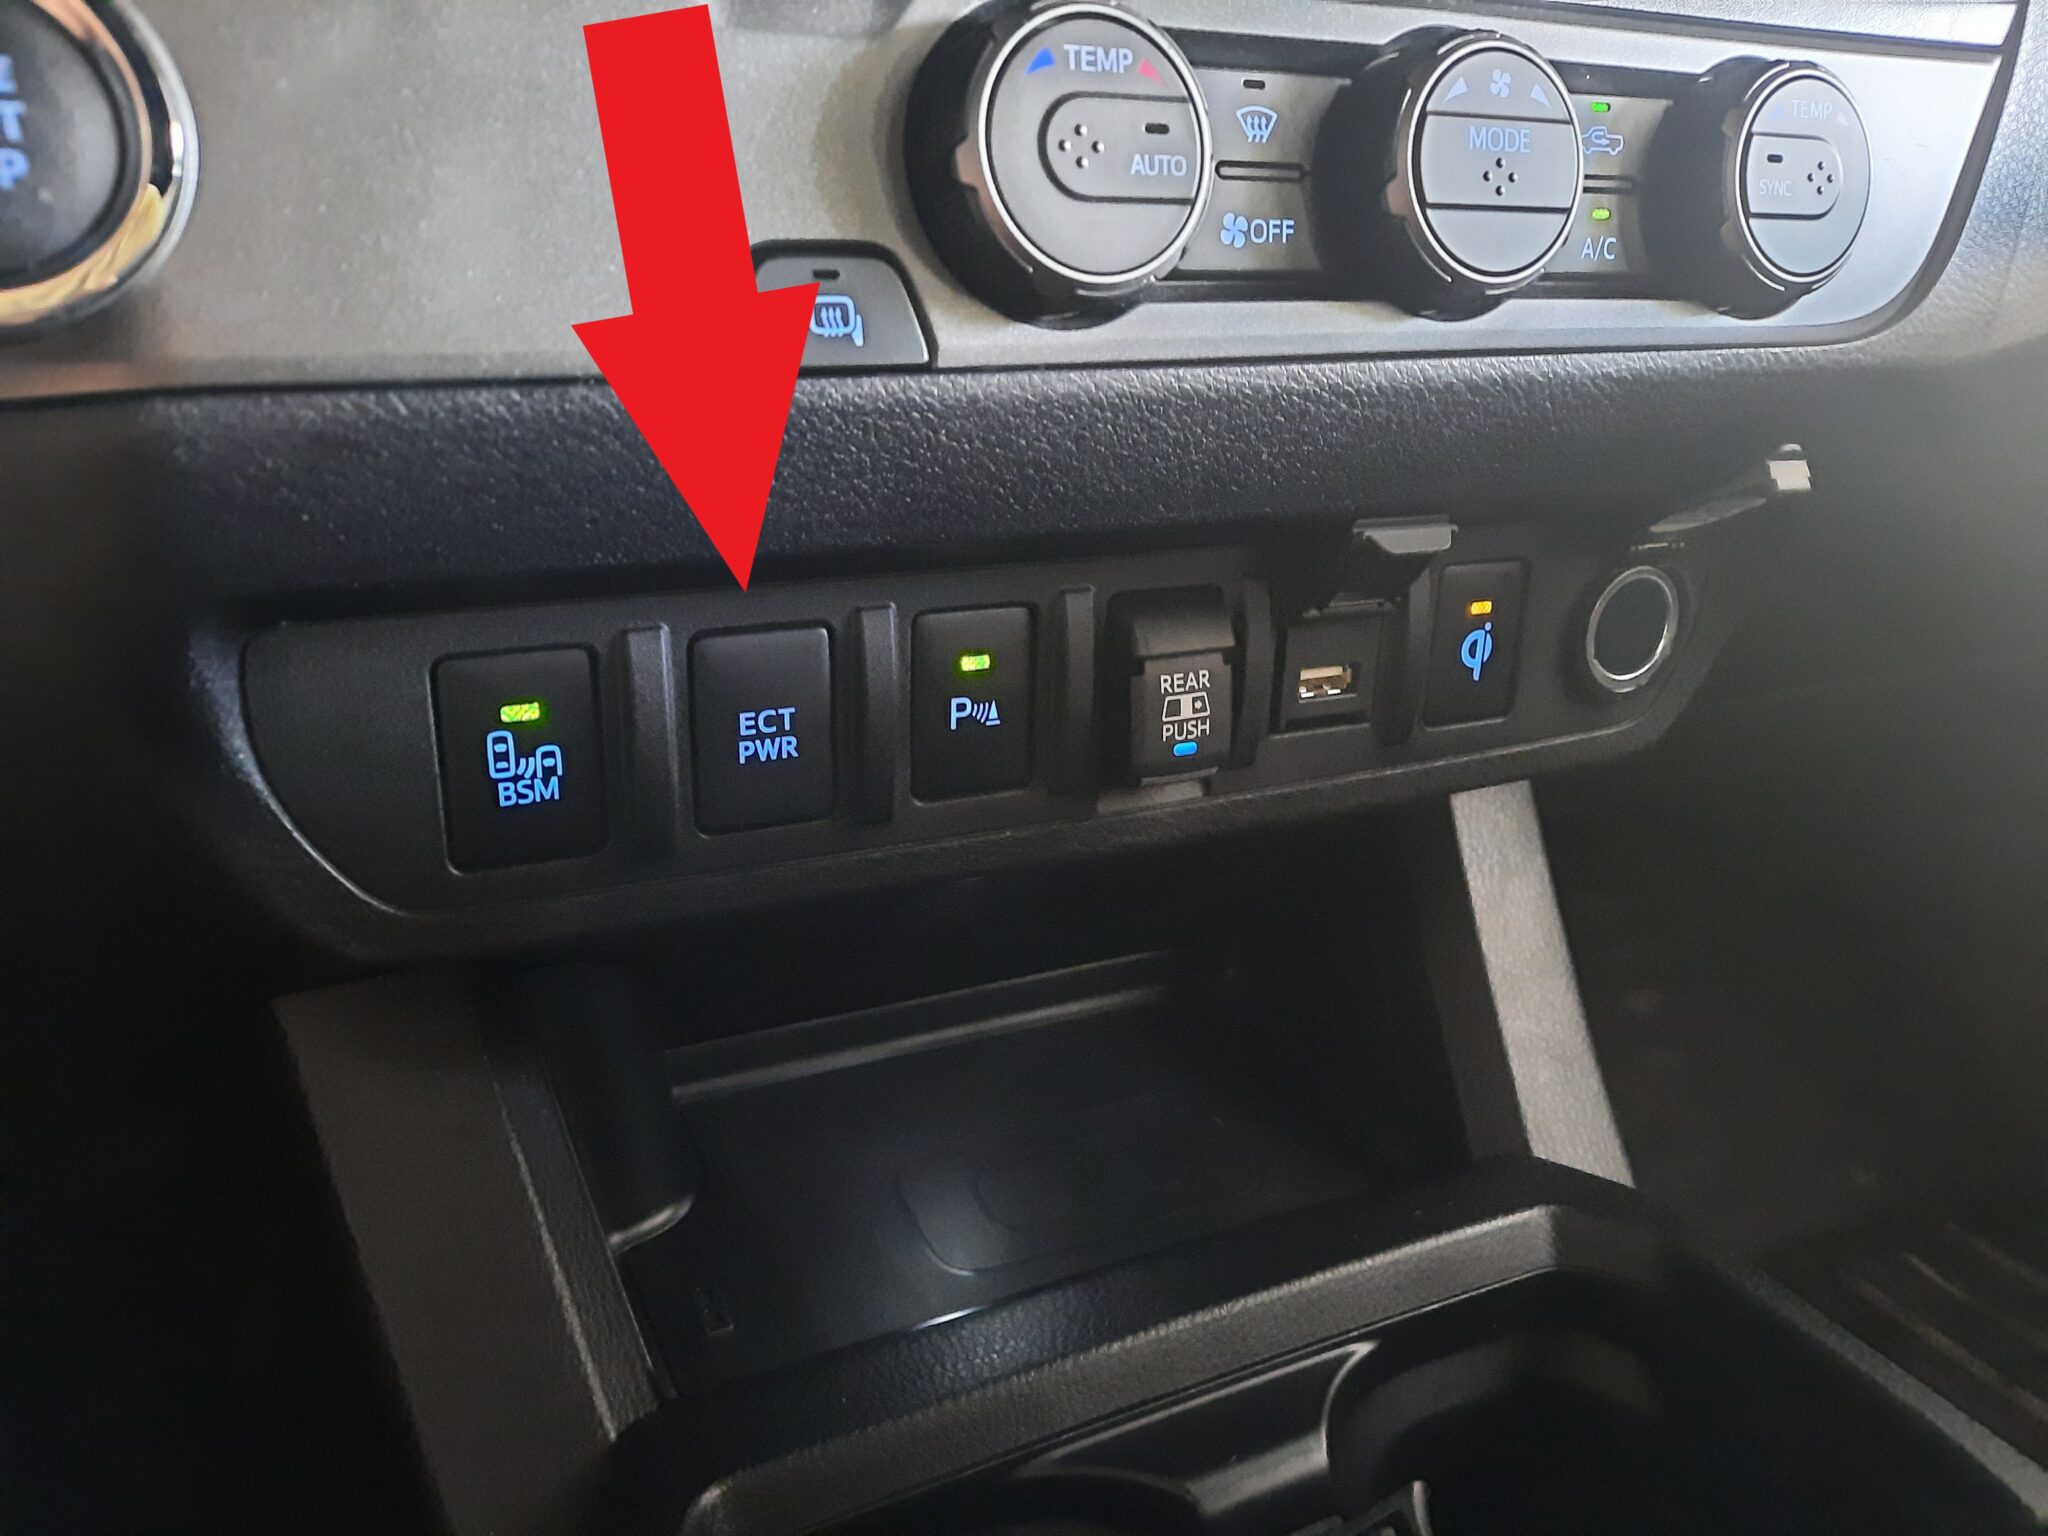 The Toyota ECT Power Button Explained